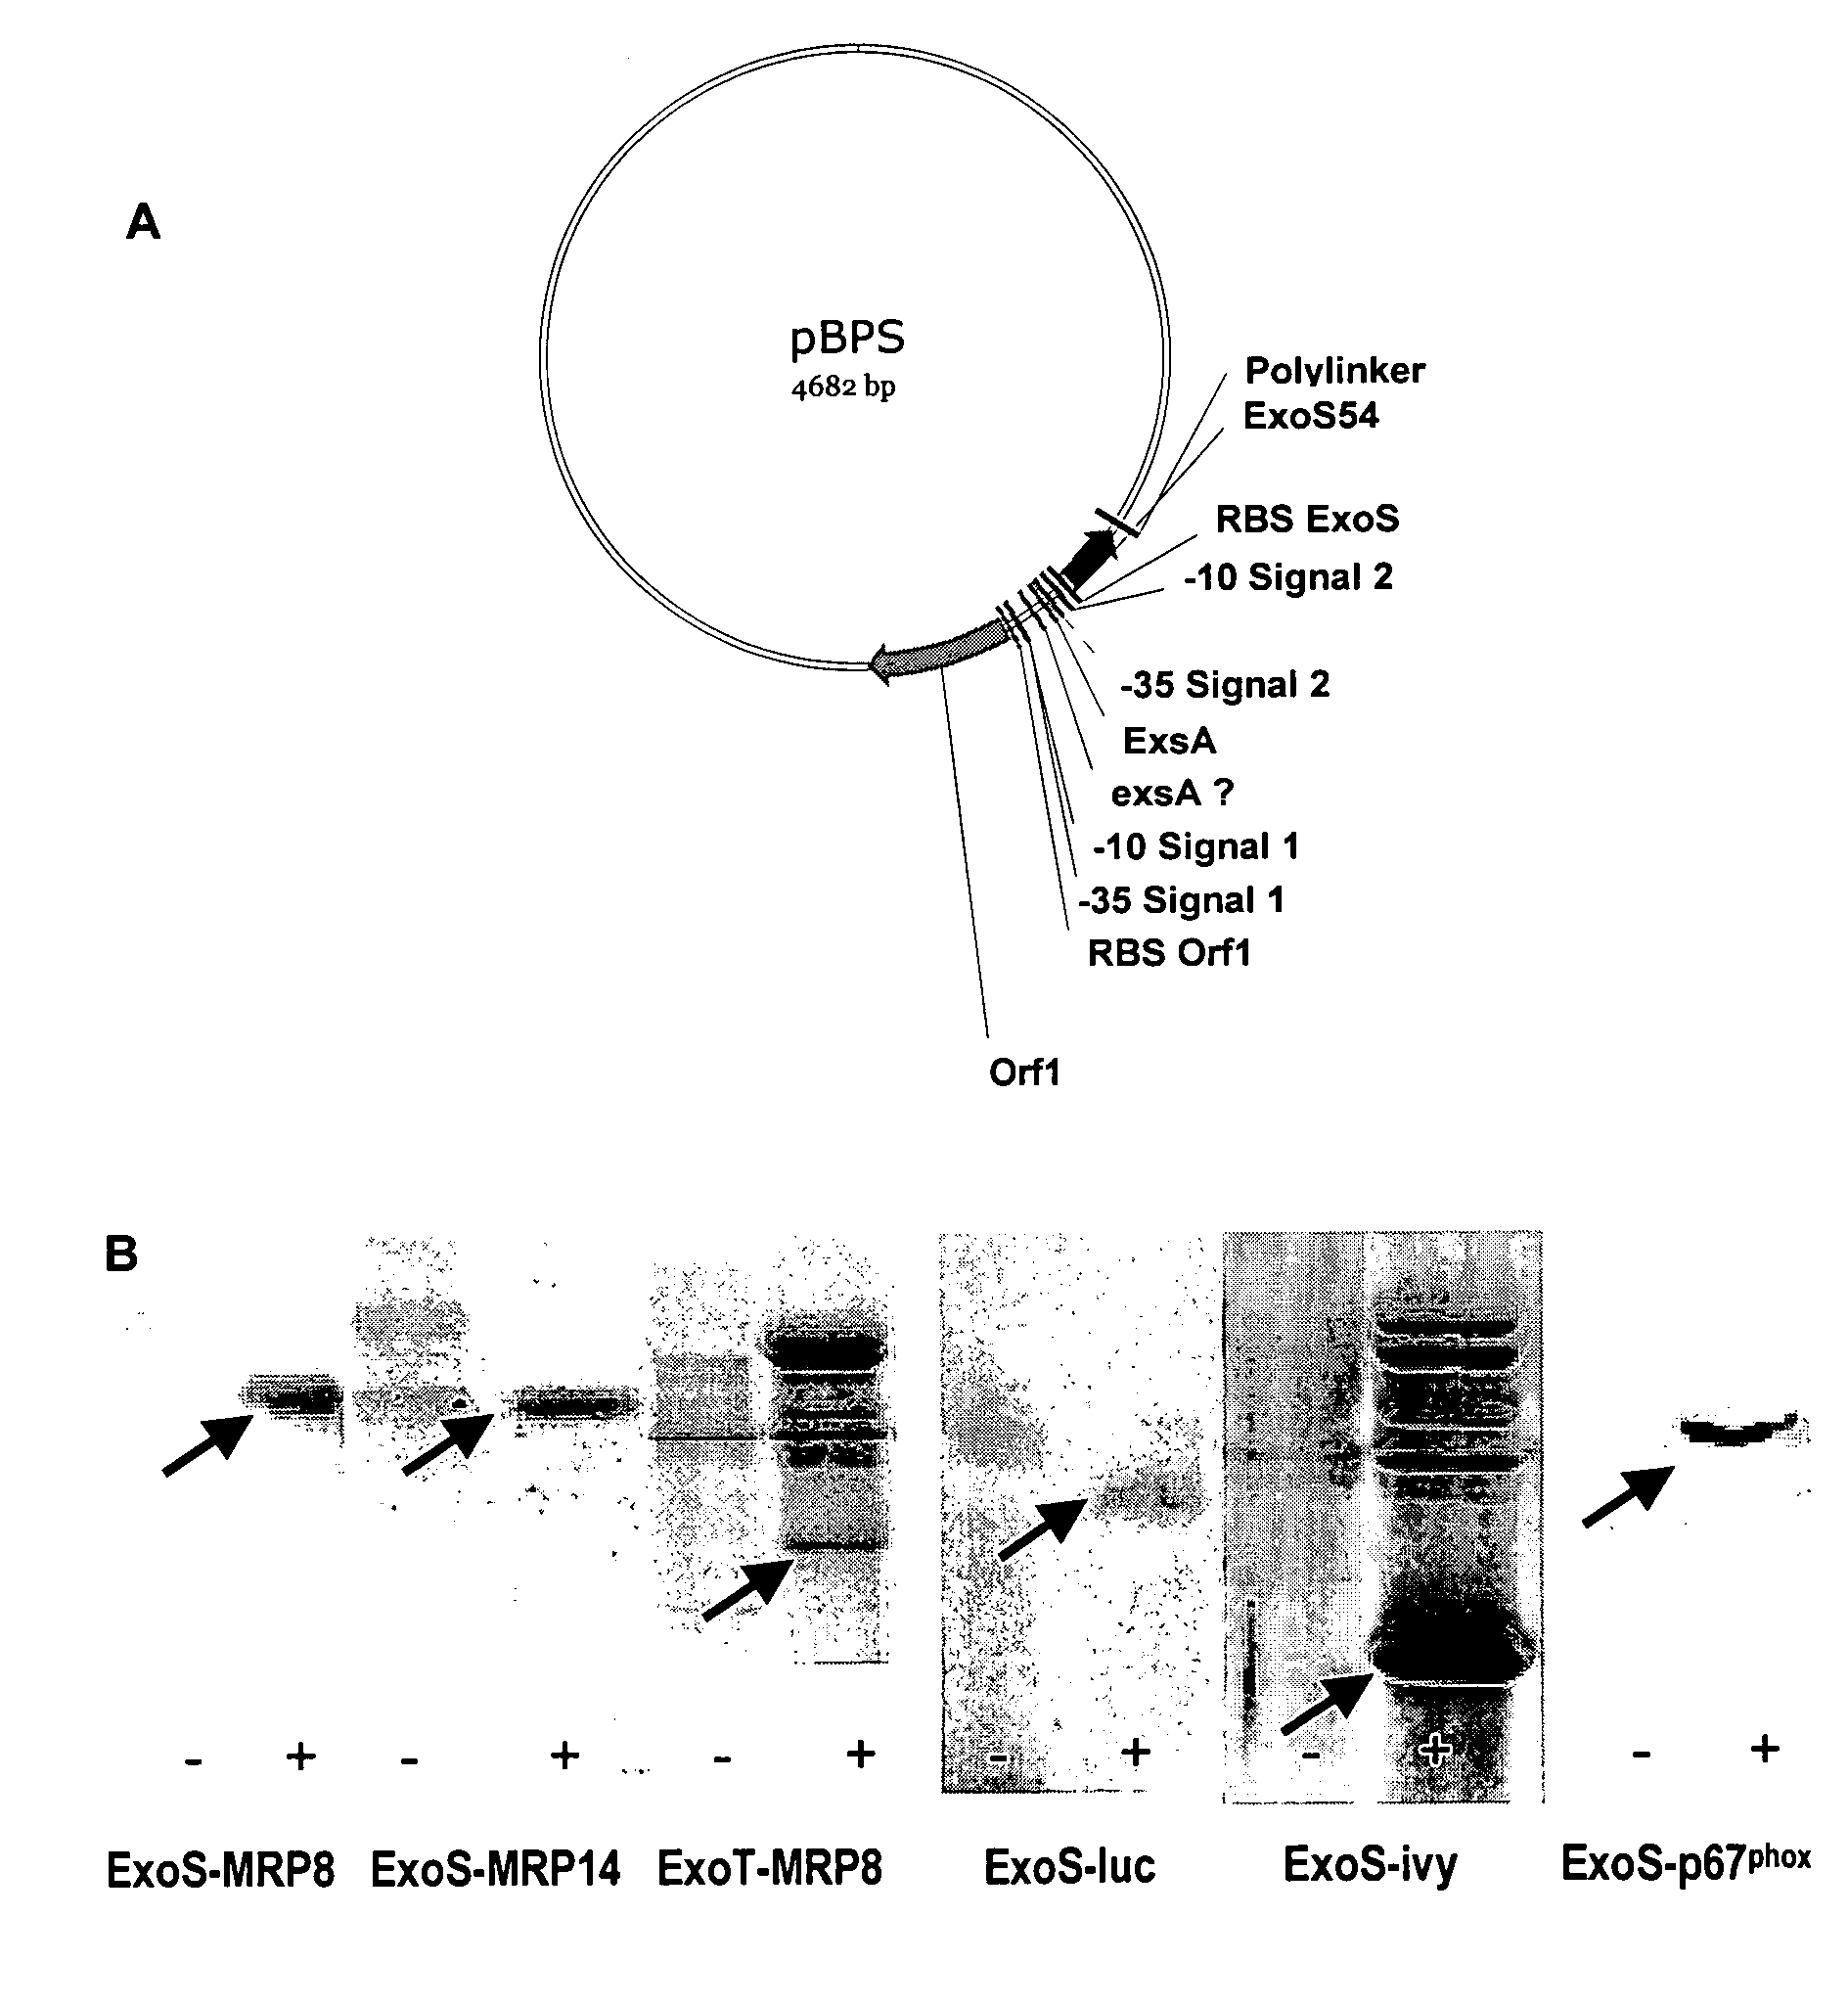 Tool for the transfer and production of proteins using the pseudomonas type III secretion system